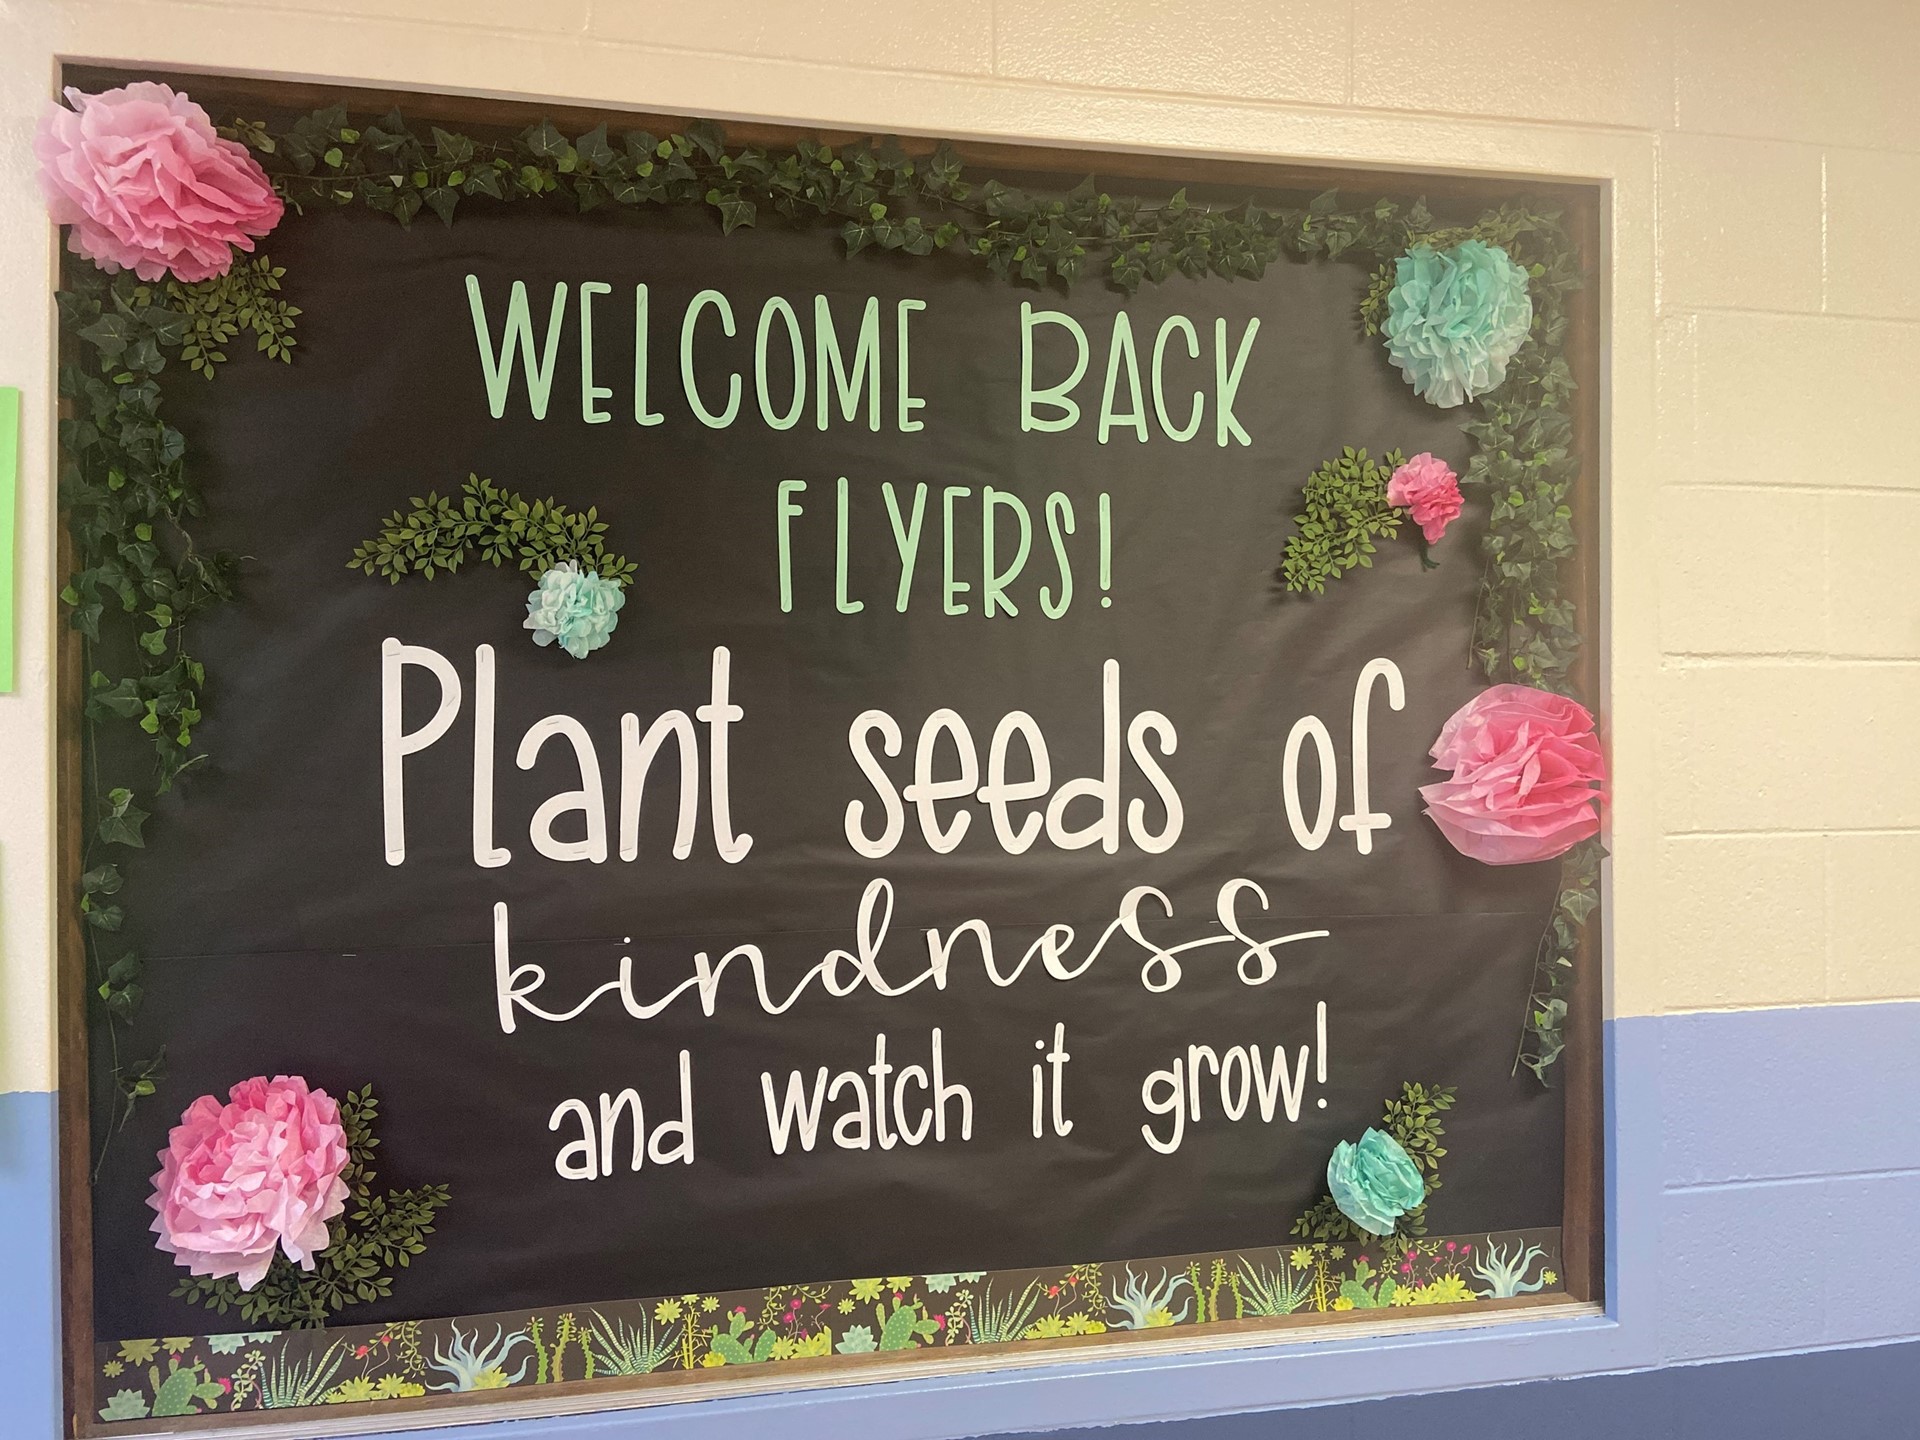 Sign reading Welcome Back Flyers! Plant seeds of kindness and watch it grow!